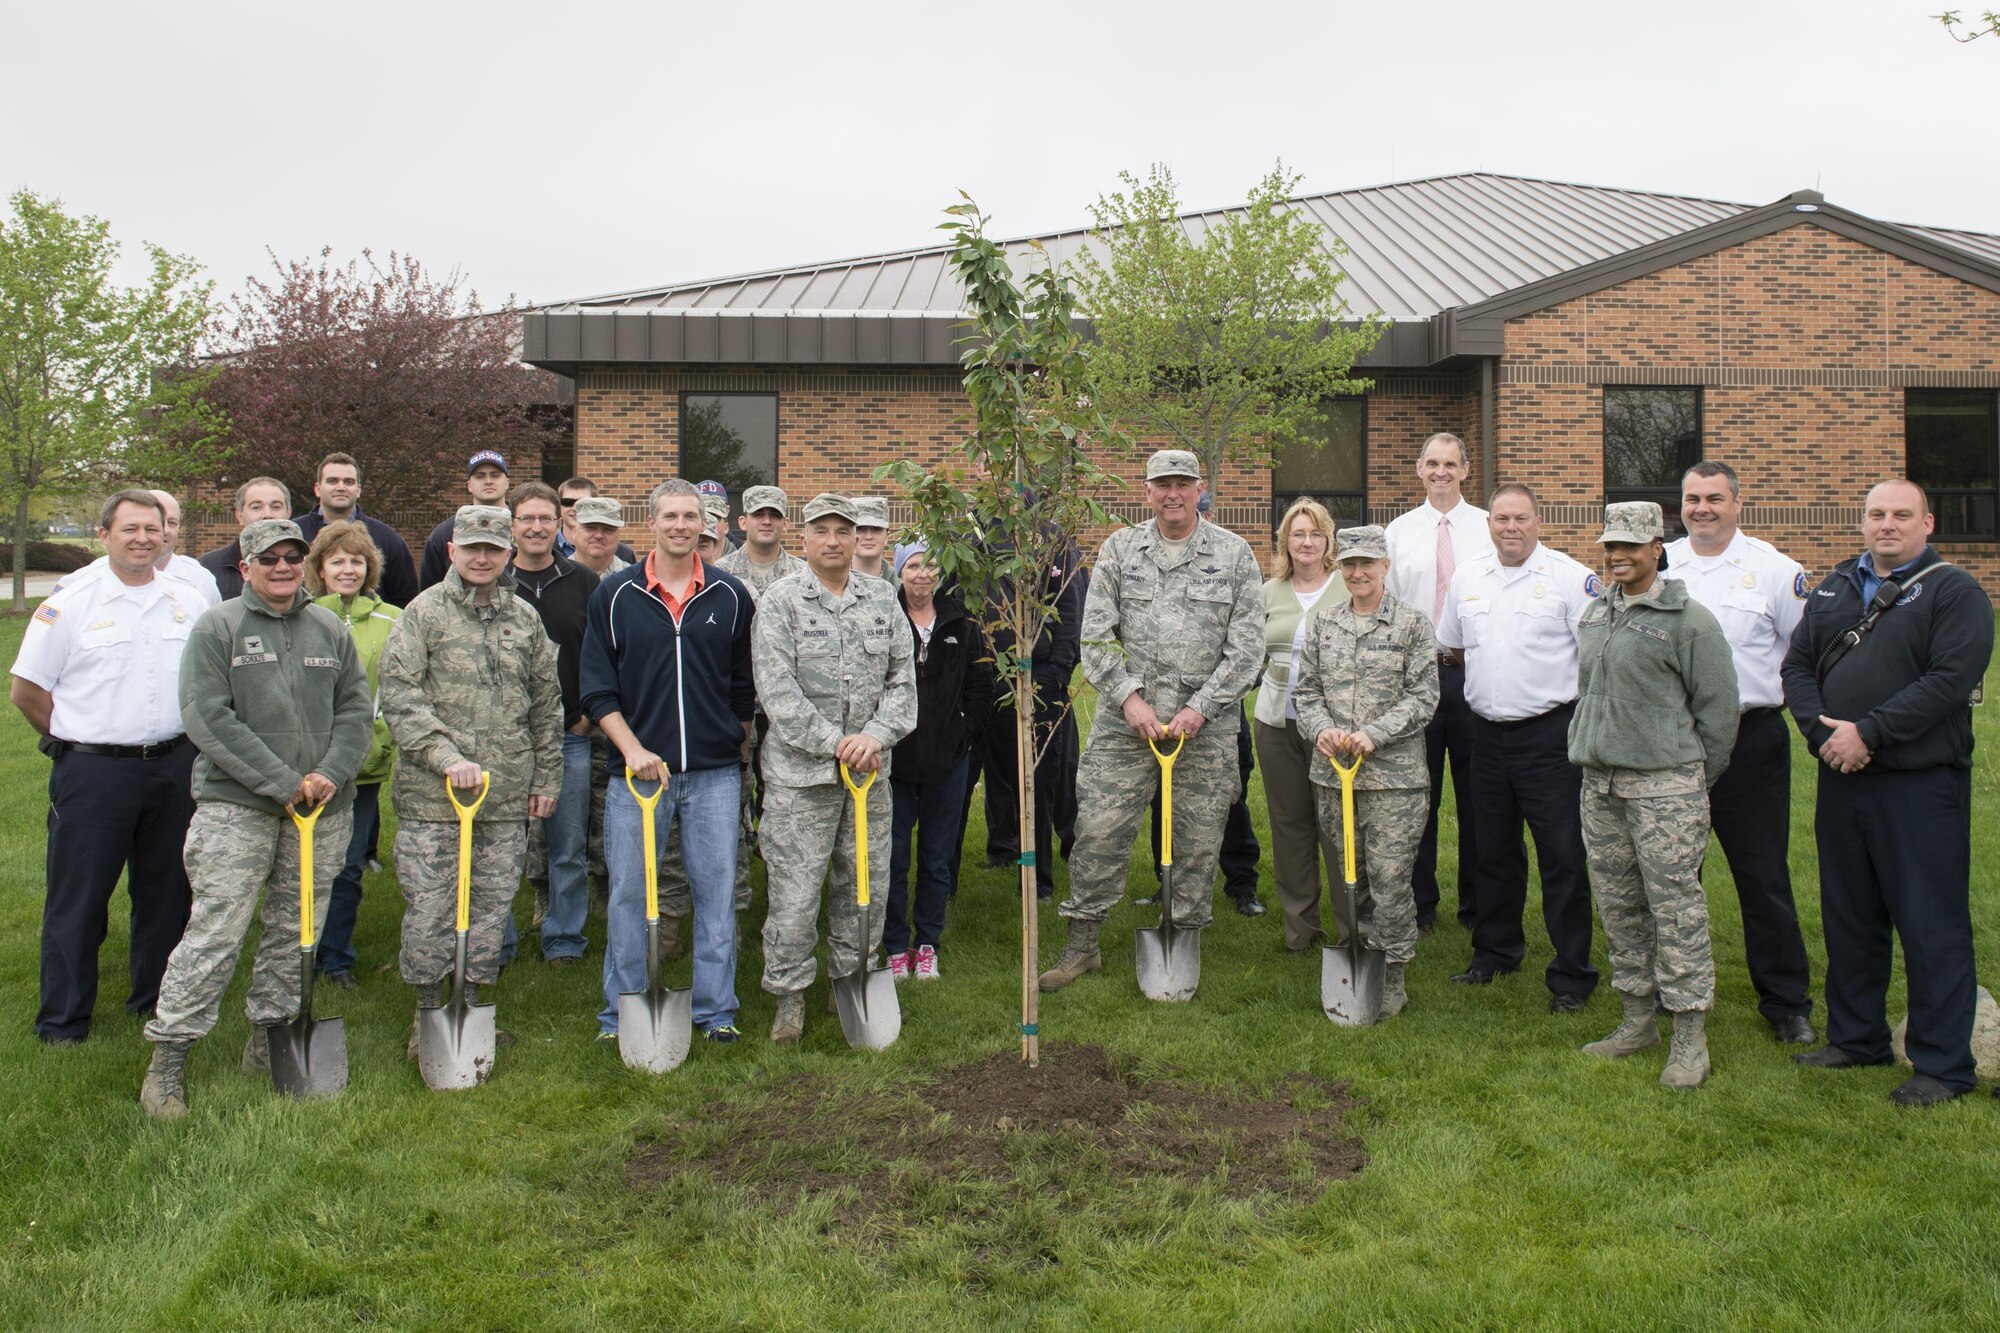 Grissom employees pose for a photo in front of a Kwanzan Cherry tree after a ceremony at Grissom Air Reserve Base, Ind., April 29, 2016 celebrating Arbor Day. Each year Arbor Day is celebrated on the last Friday of April and provides an opportunity to learn about trees and take positive action to make the world a better place. (U.S. Air Force photo/Tech. Sgt. Benjamin Mota)